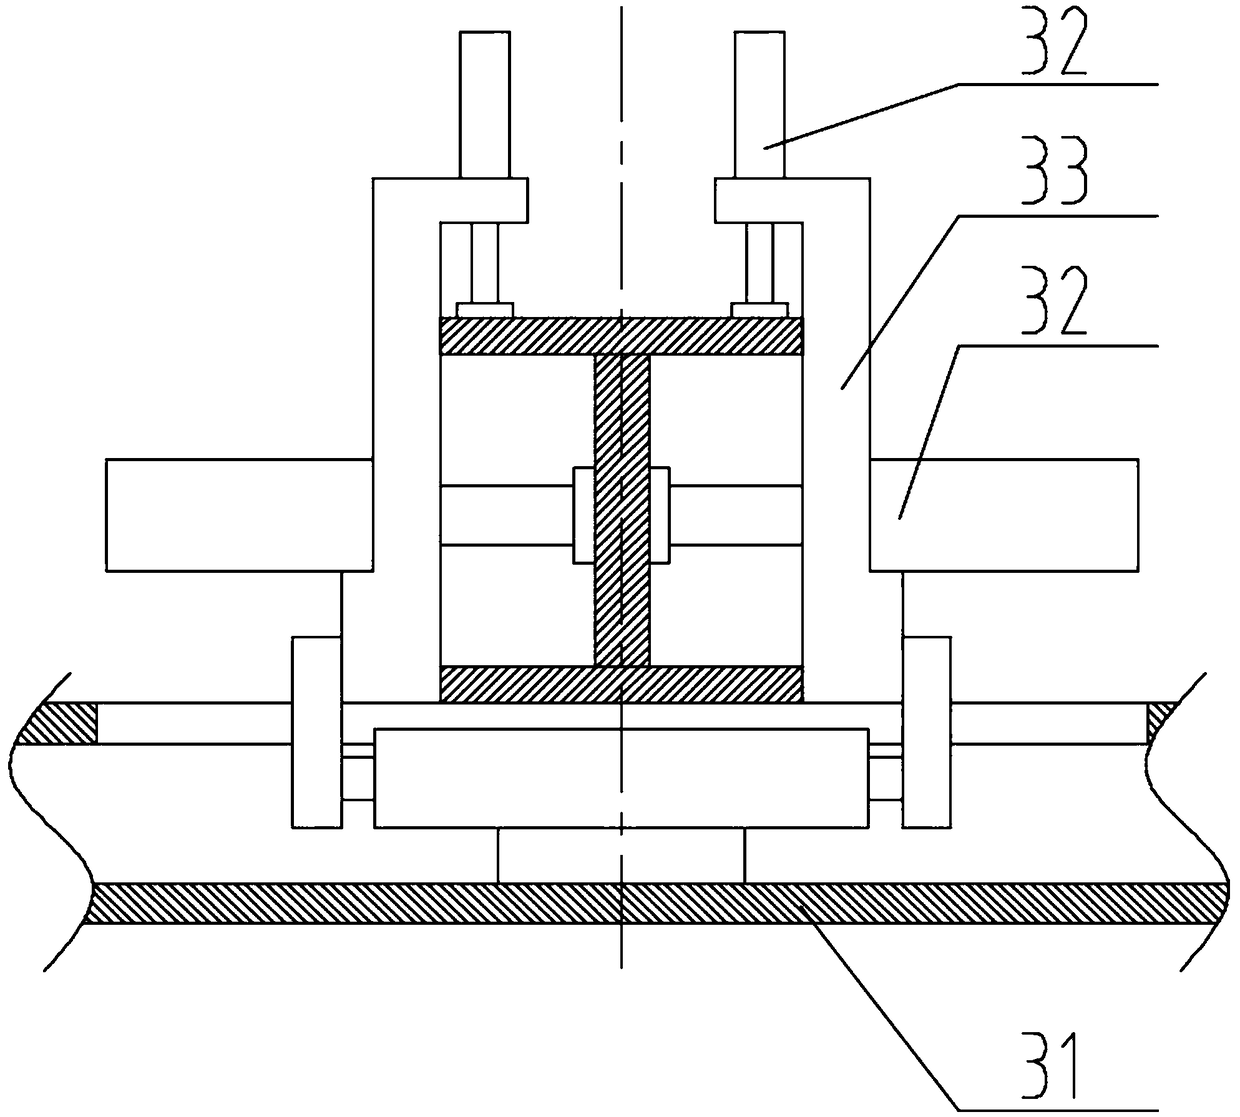 Plate positioning part of a trailer frame assembly assembly welding system